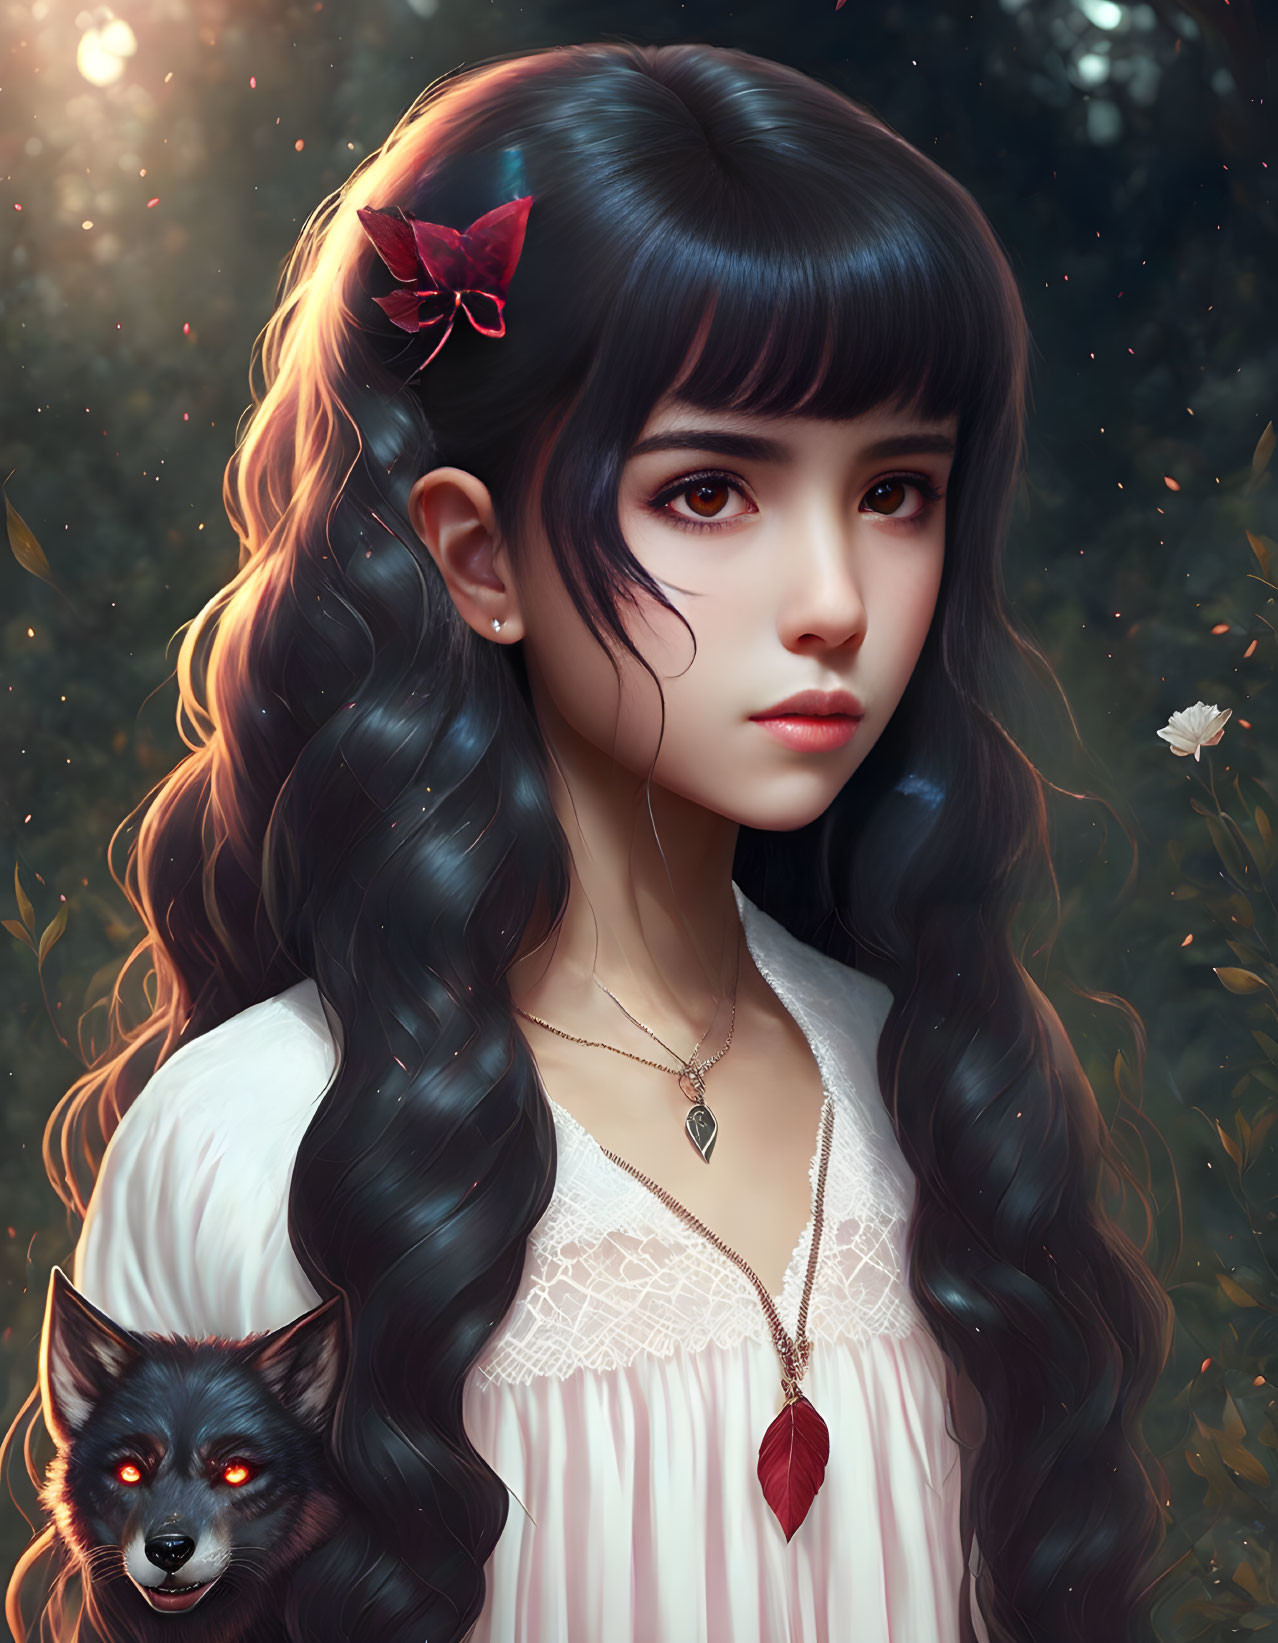 Digital portrait of woman with expressive eyes and wavy black hair, featuring red butterfly clip and small black